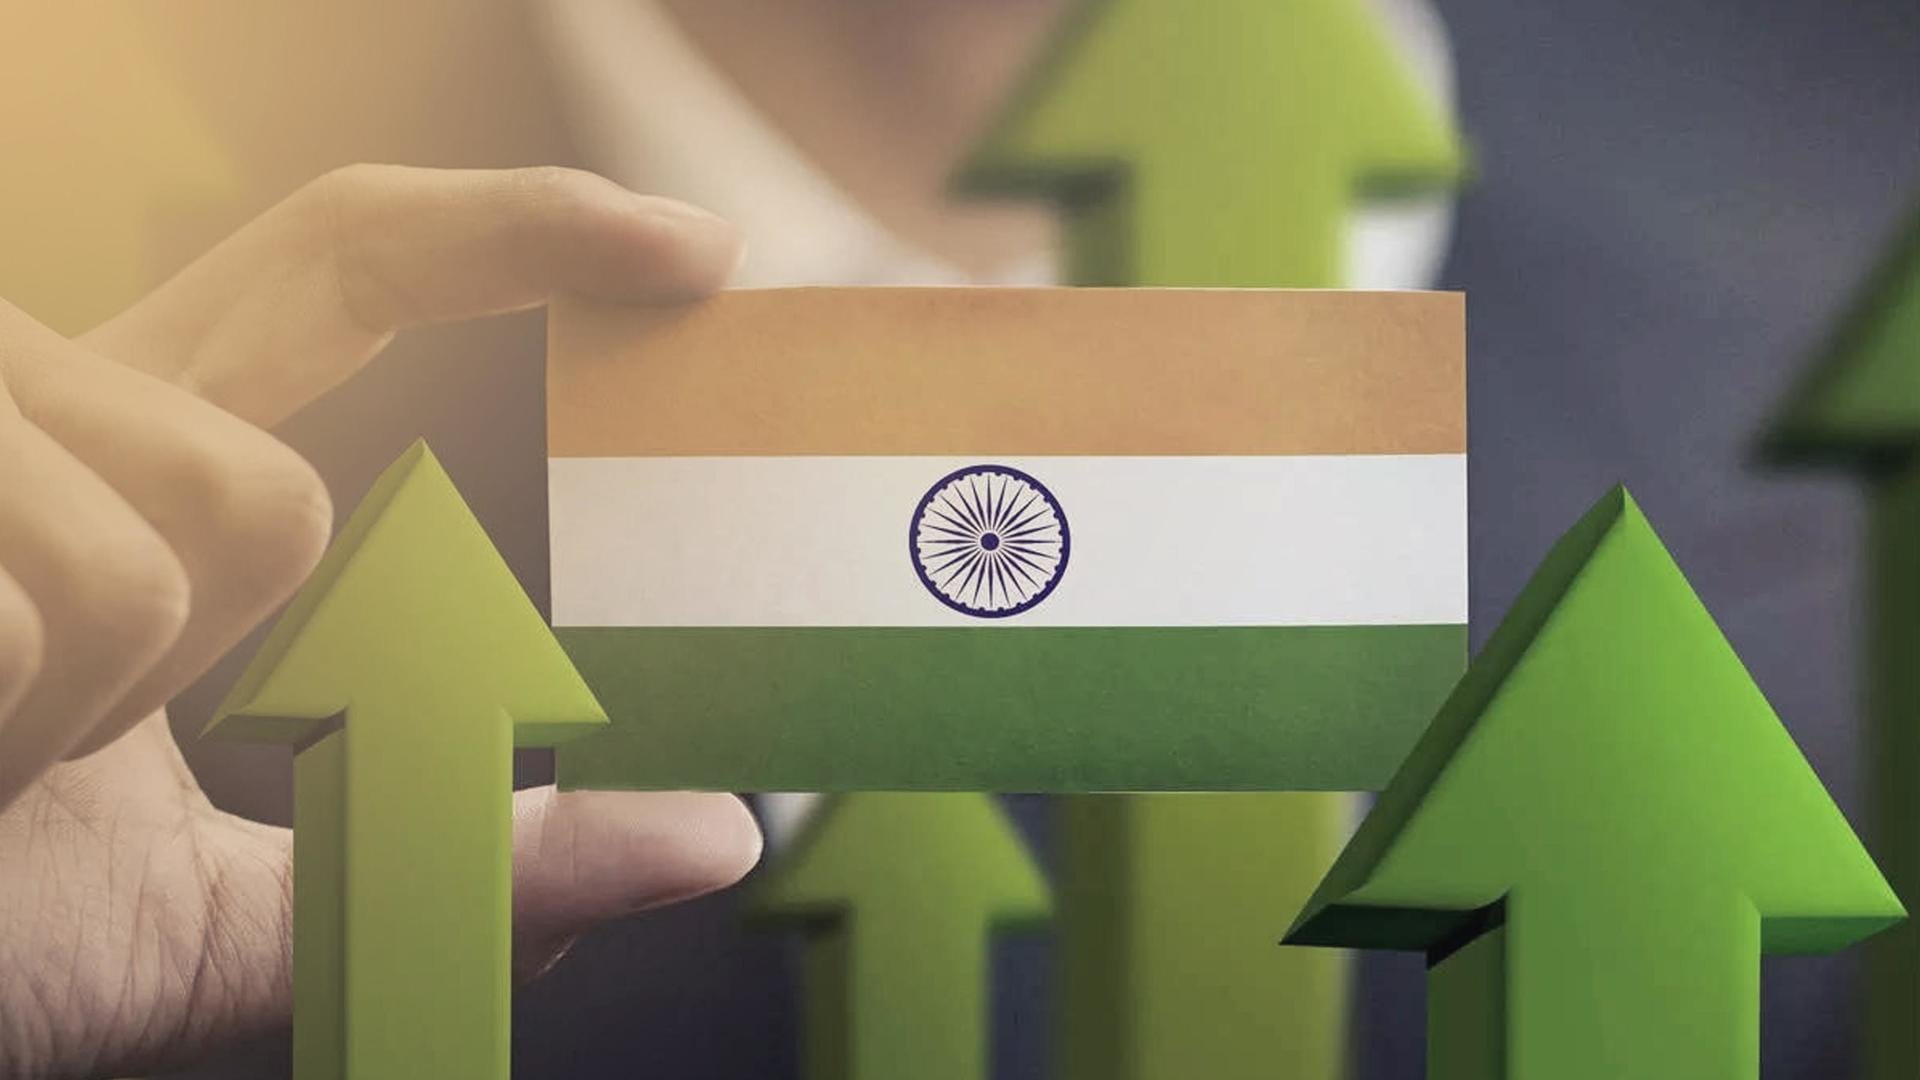 A statement from Morgan Stanley reported that a policy shift promoting investment, demographic advantages, and public digital infrastructure would catapult India to the world's third-largest economy by 2027. The article, Why This Is India's Decade, discusses the trends and regulations that will affect the economy of the nation during the next ten years.